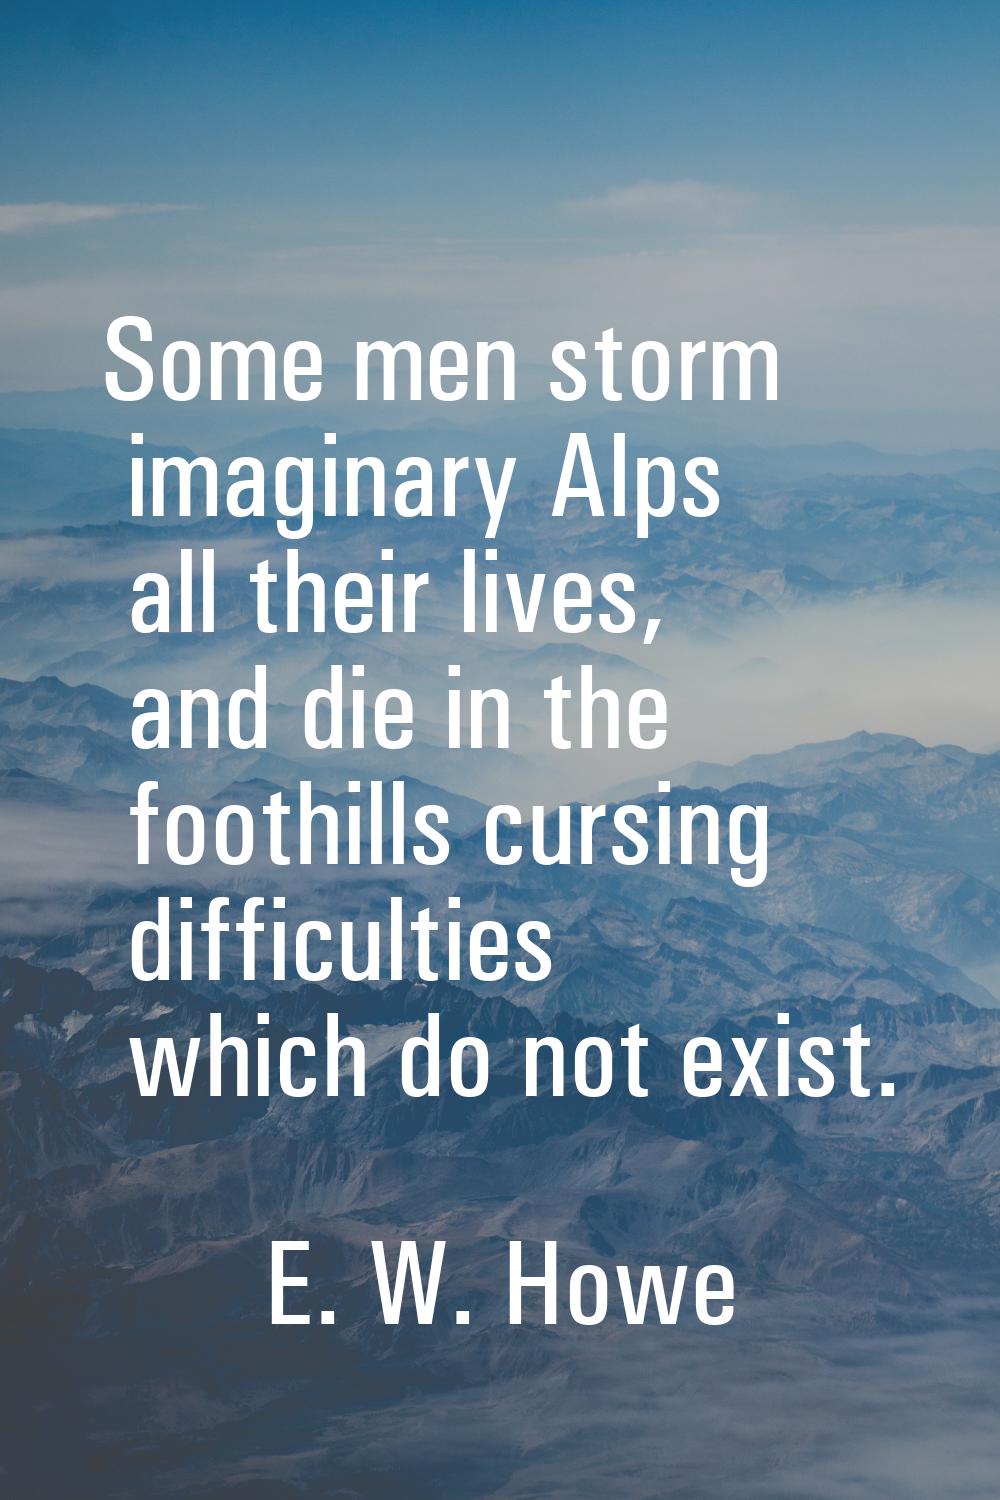 Some men storm imaginary Alps all their lives, and die in the foothills cursing difficulties which 